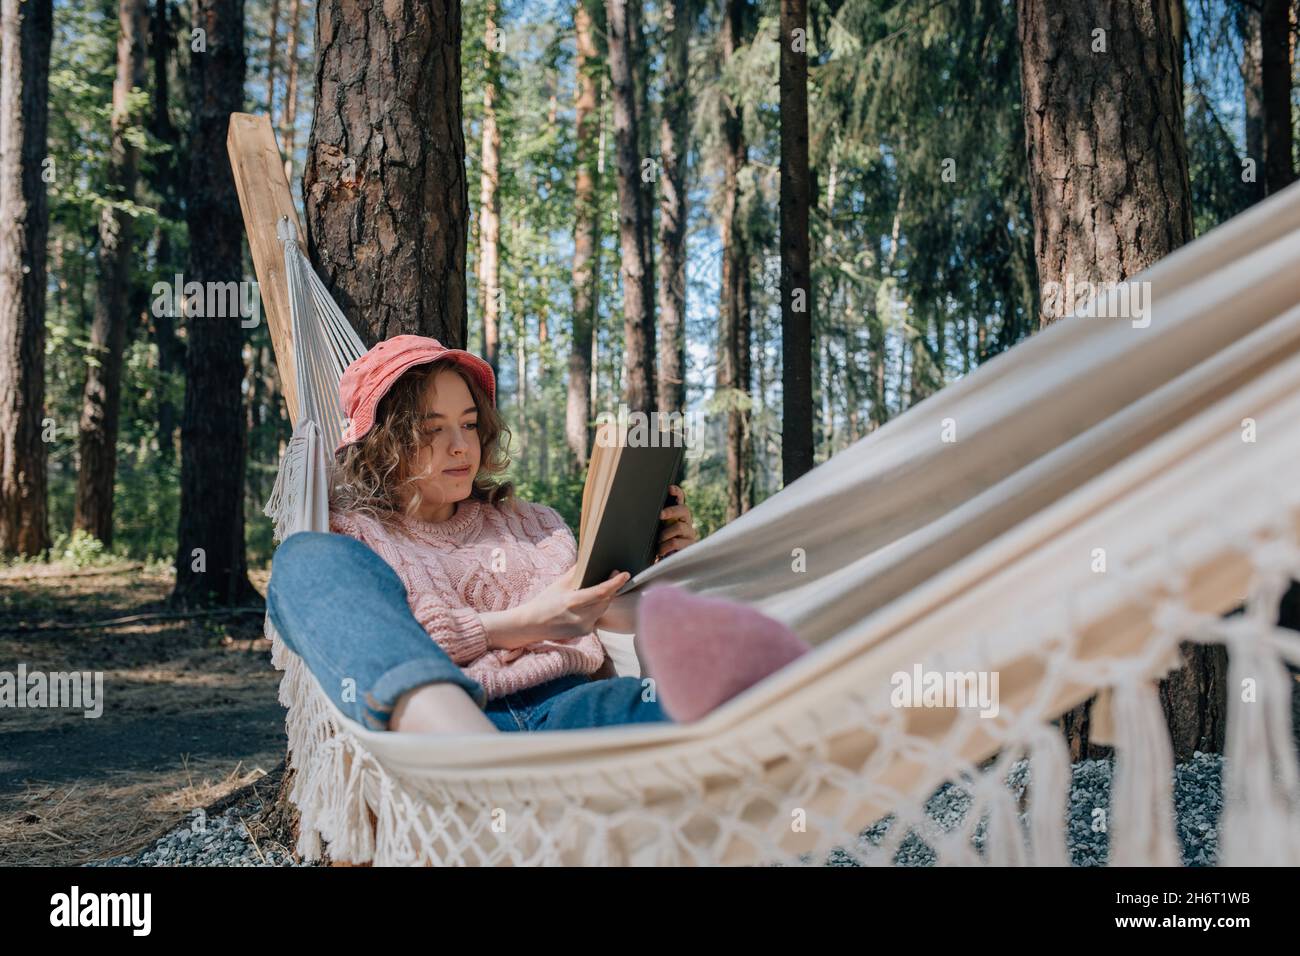 Young woman in hammock reading book in forest, relaxing. Stock Photo